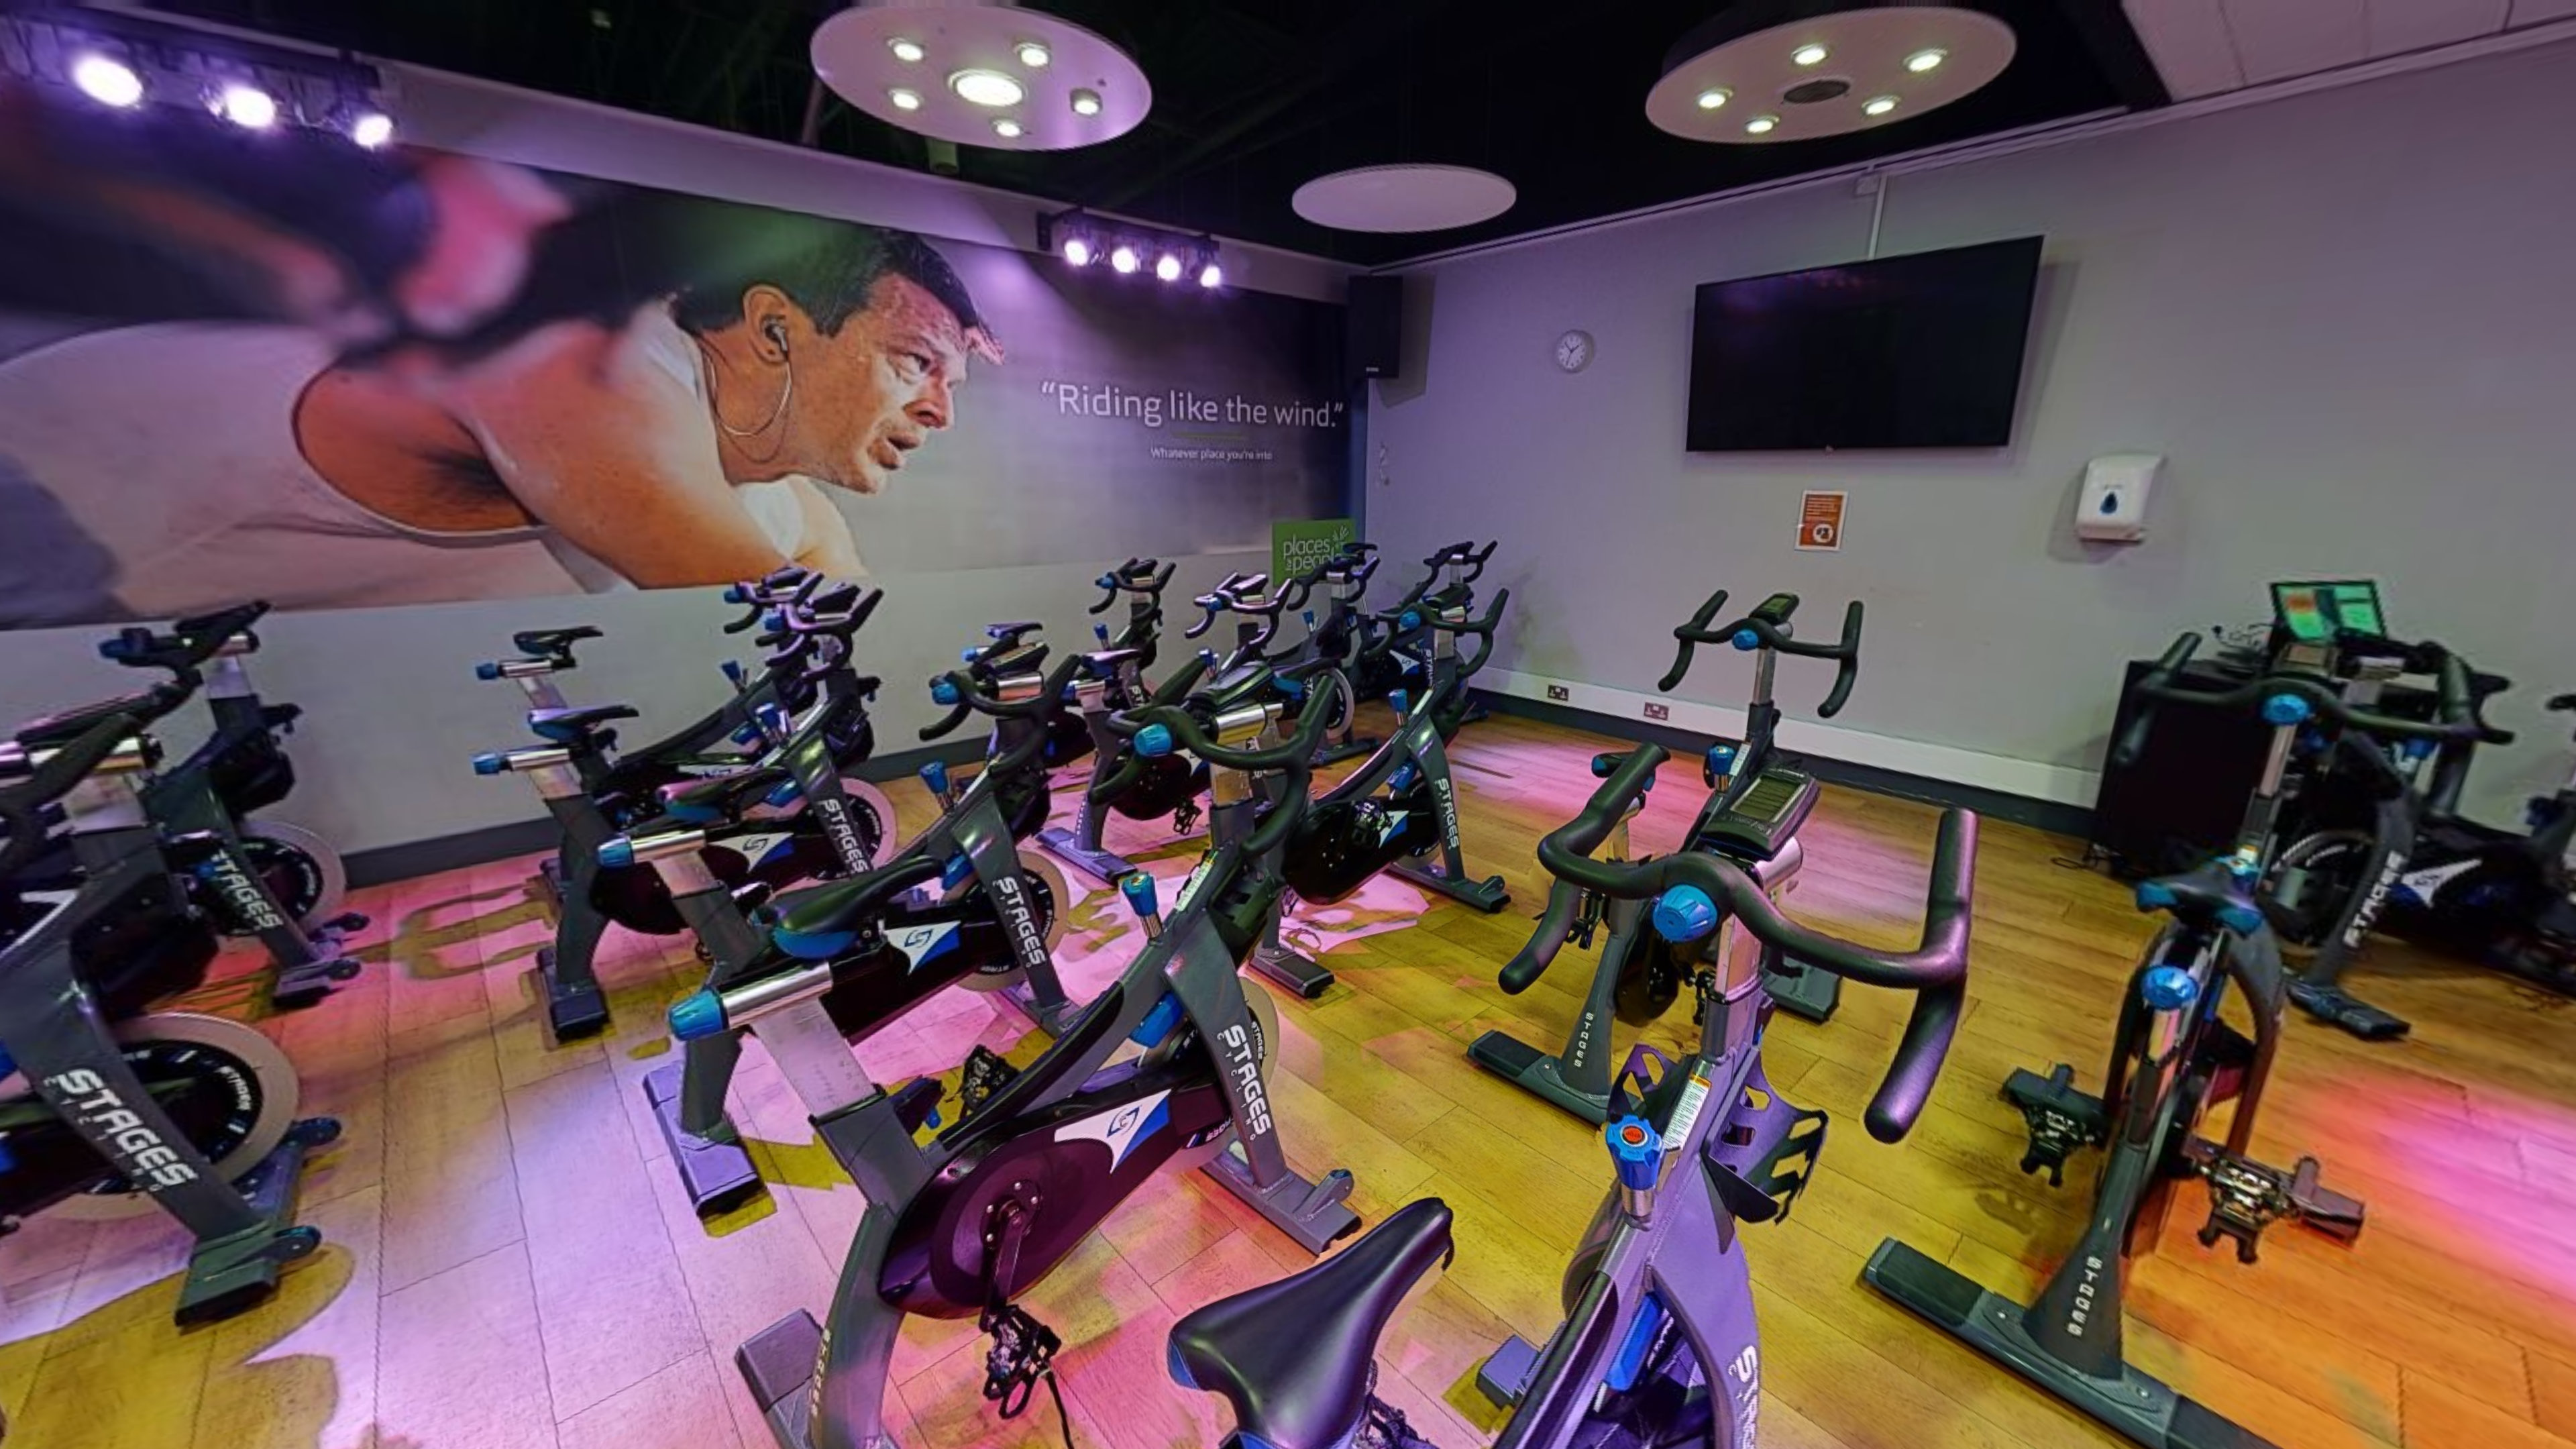 Group cycling studio at Harborne Pool & Fitness Centre Harborne Pool & Fitness Centre Birmingham 01214 286820